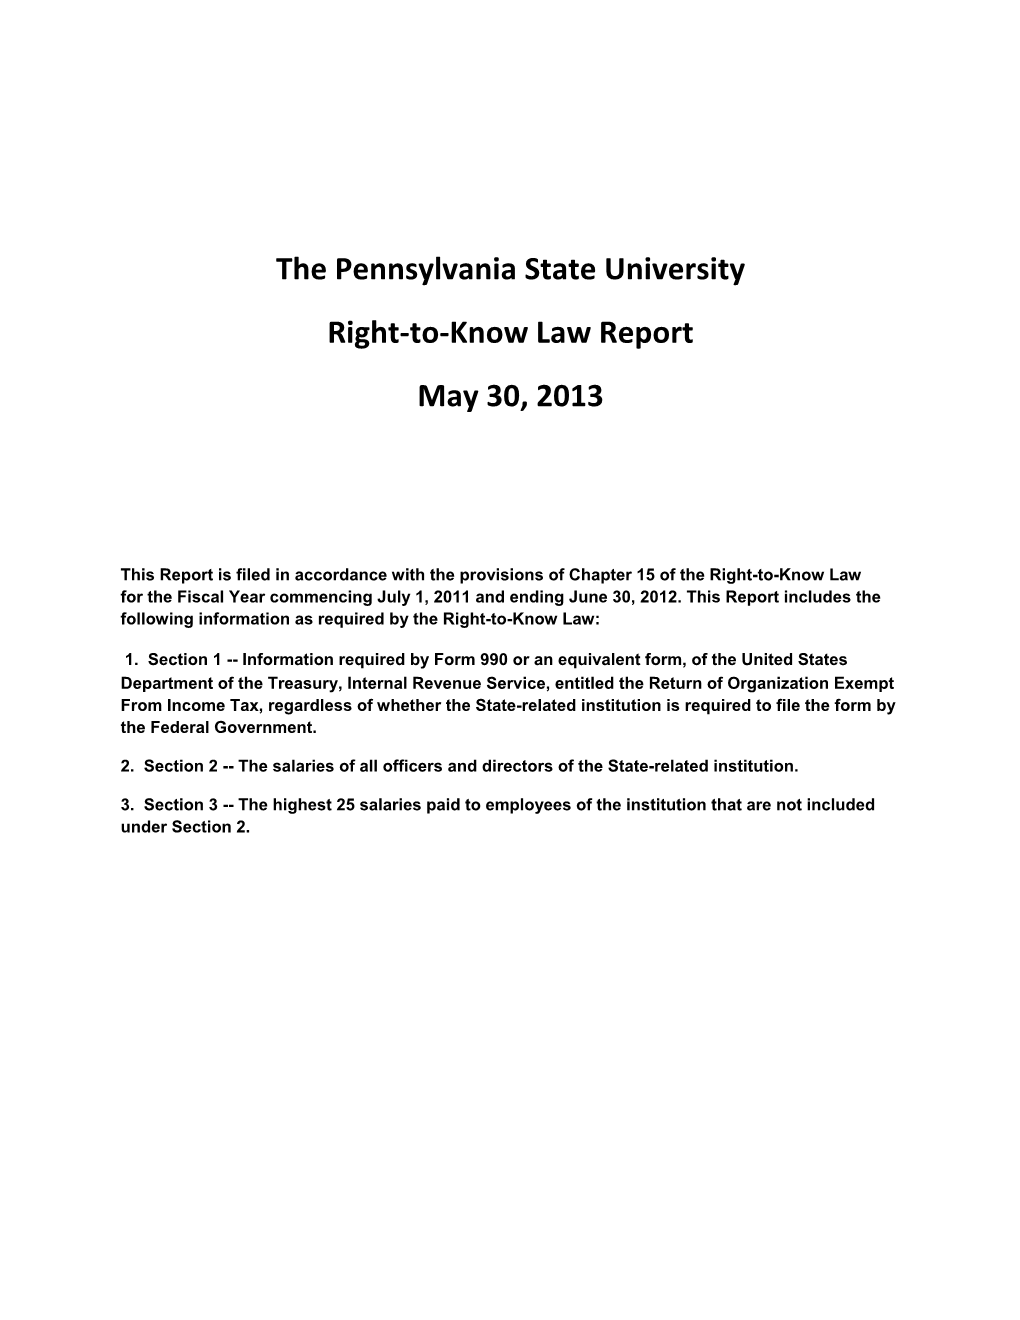 The Pennsylvania State University Right-To-Know Law Report May 30, 2013